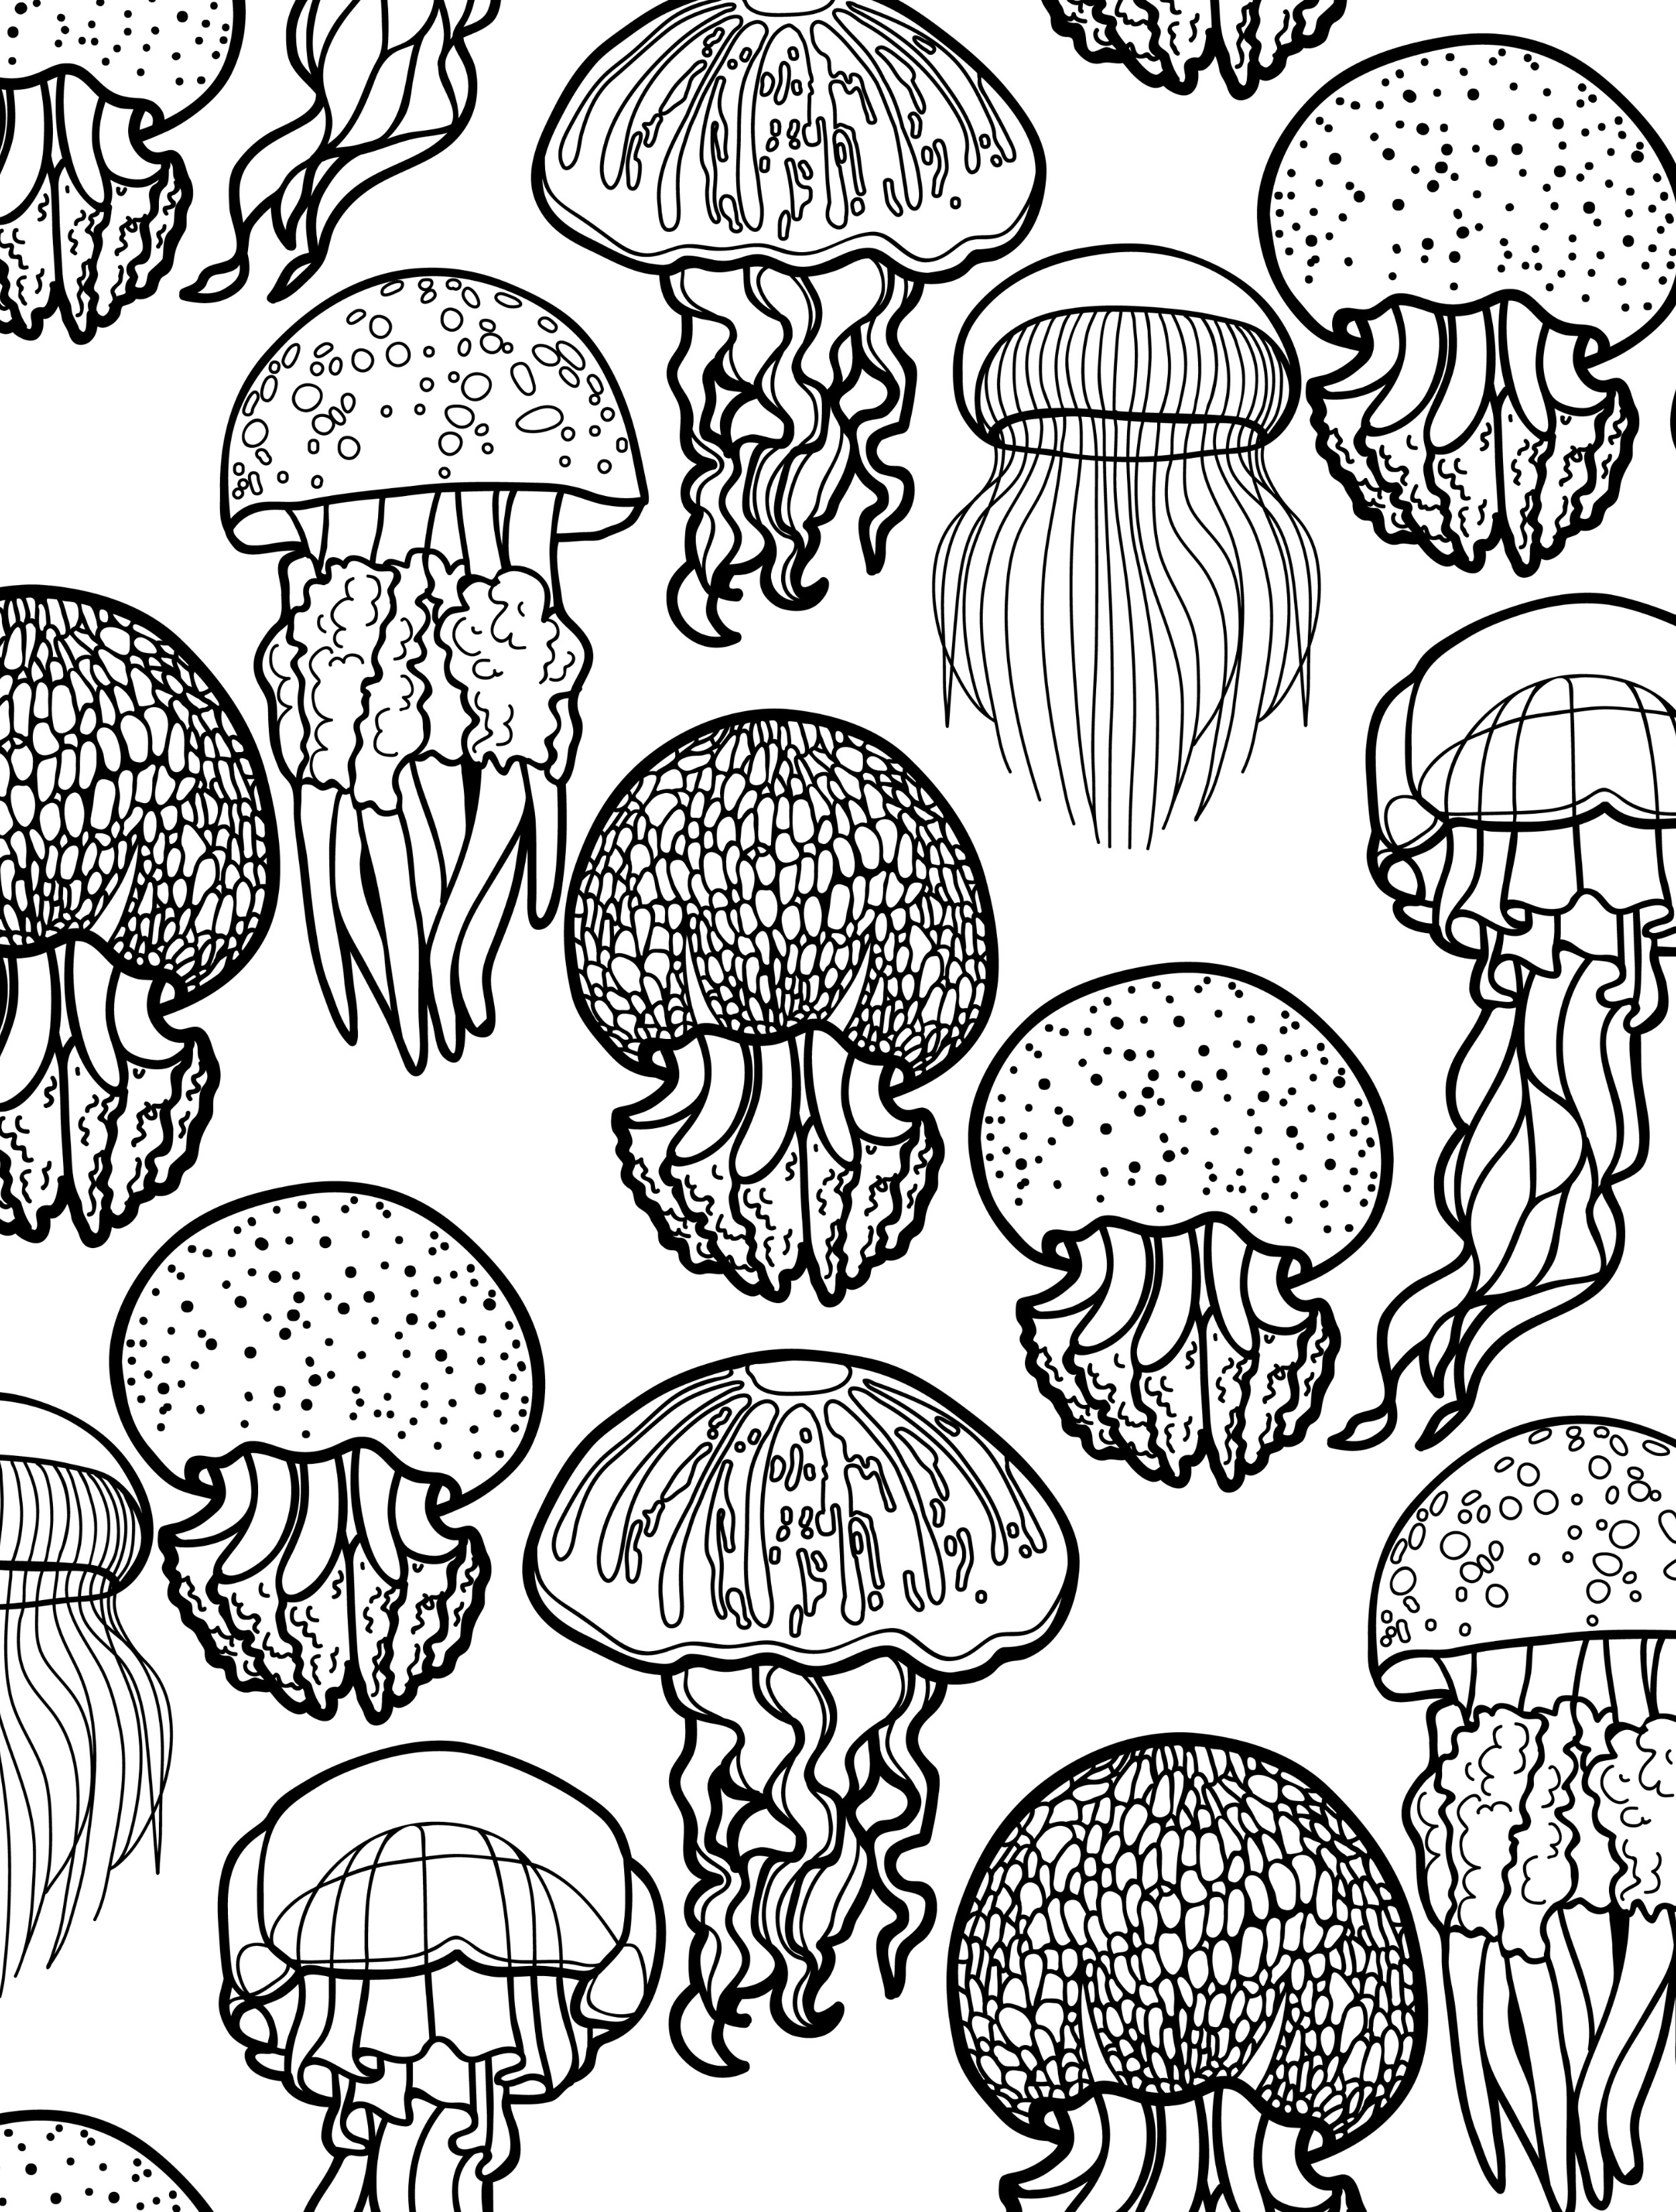 Simple Adult Coloring Pages At Getcolorings.com | Free Printable